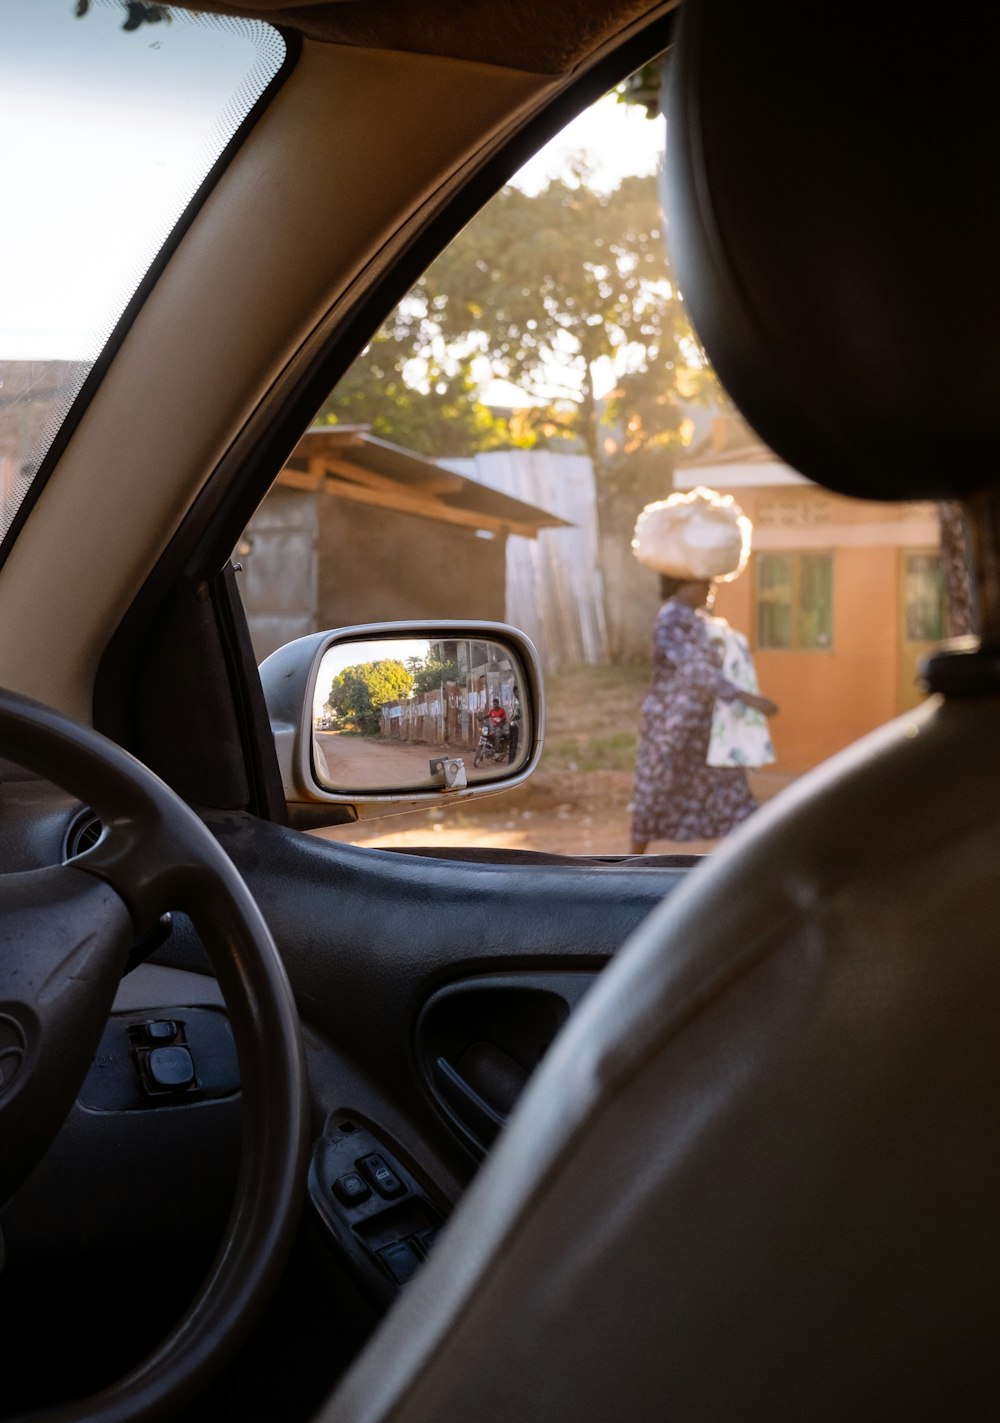 a rear view mirror of a car with a woman in a dress